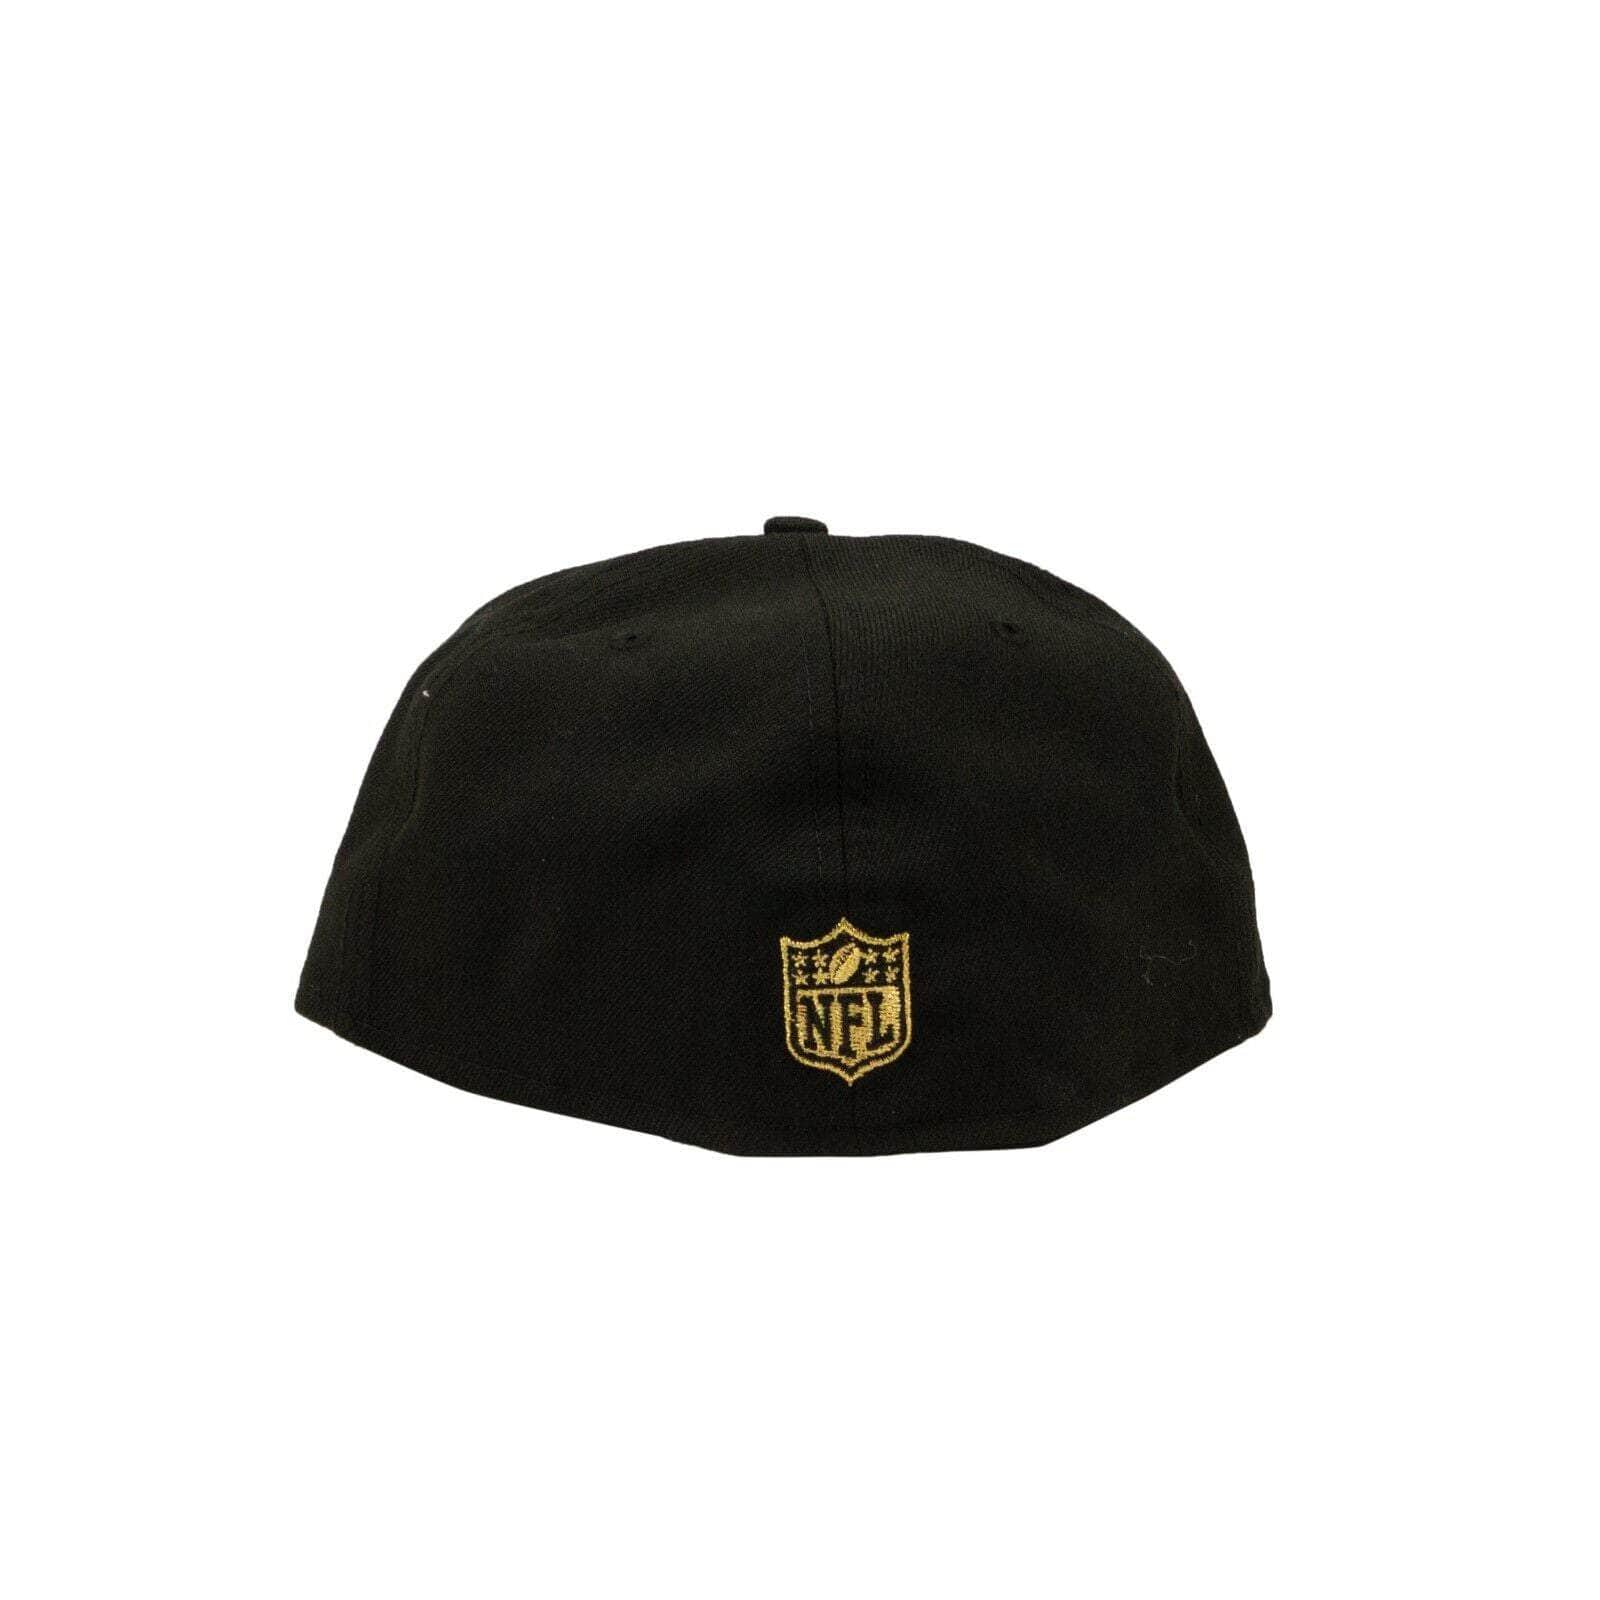 Just Don channelenable-all, chicmi, couponcollection, gender-mens, just-don, main-accessories, mens-shoes, size-7_3-4, under-250 7_3-4 / JSD-XACC-0001/7_3-4 Black 59 Fiffty New Orleans Saints Cap JSD-XACC-0001/7_3-4 JSD-XACC-0001/7_3-4